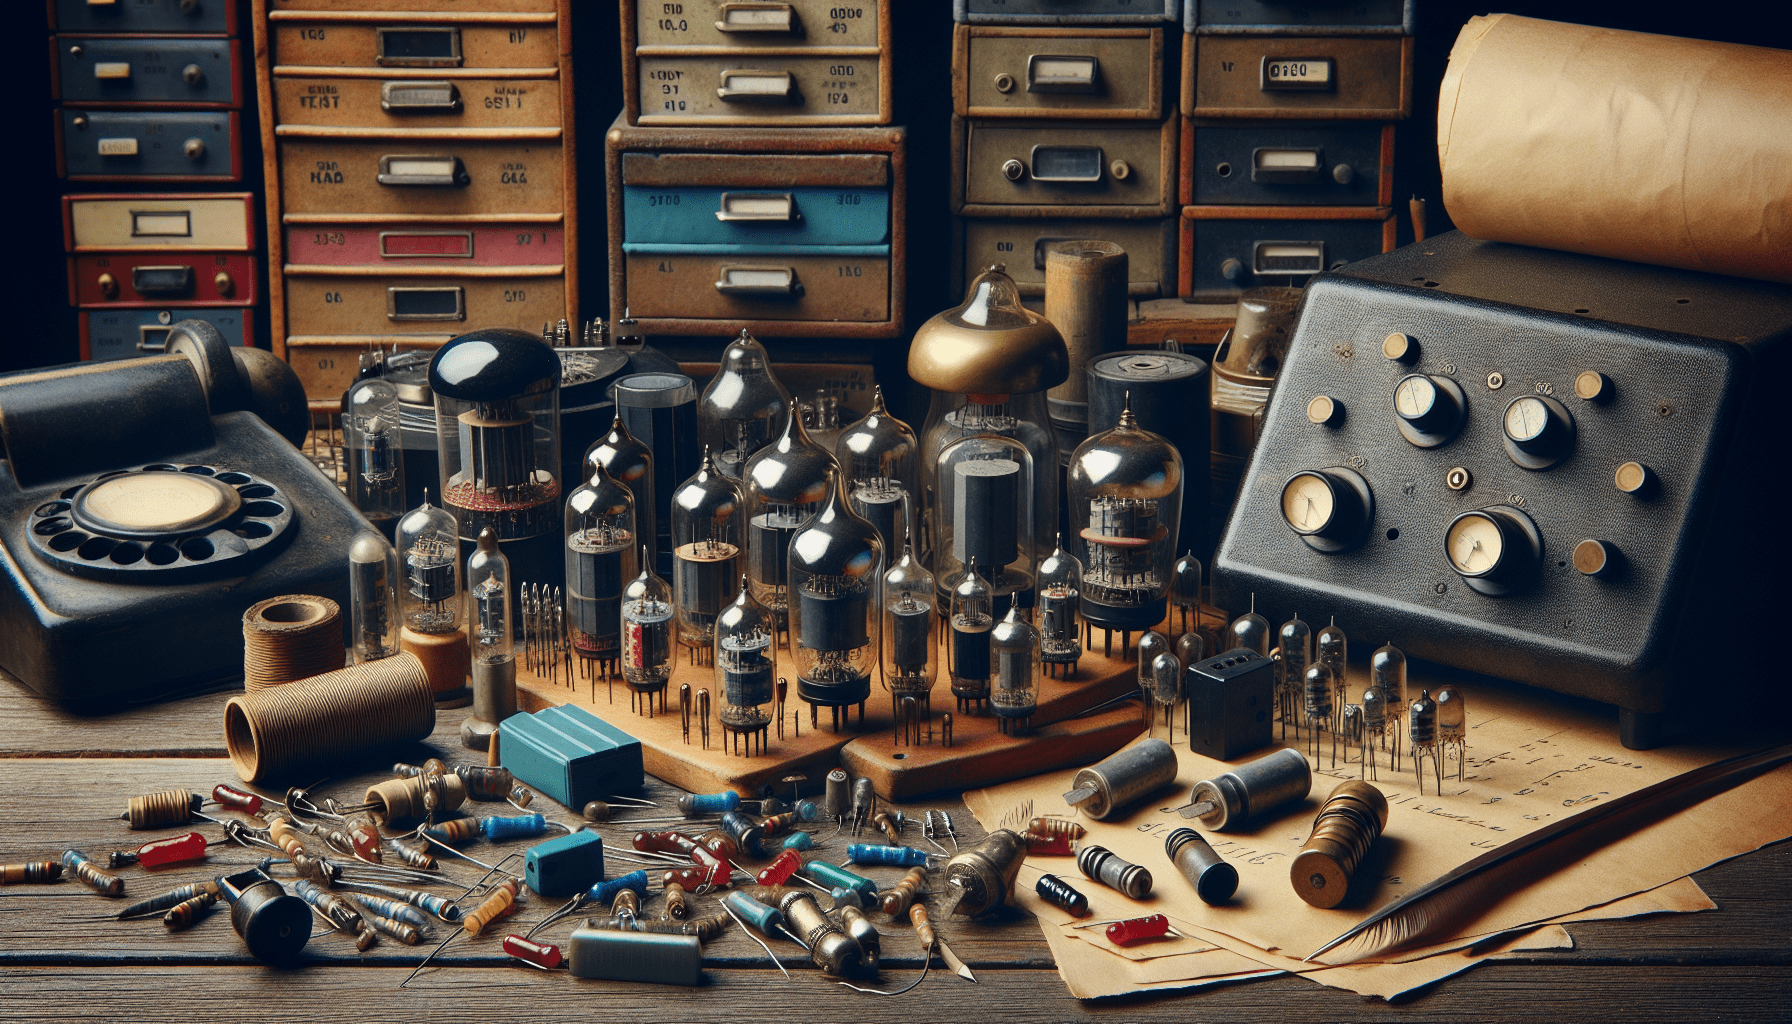 A historic image of early radio equipment and electronic components